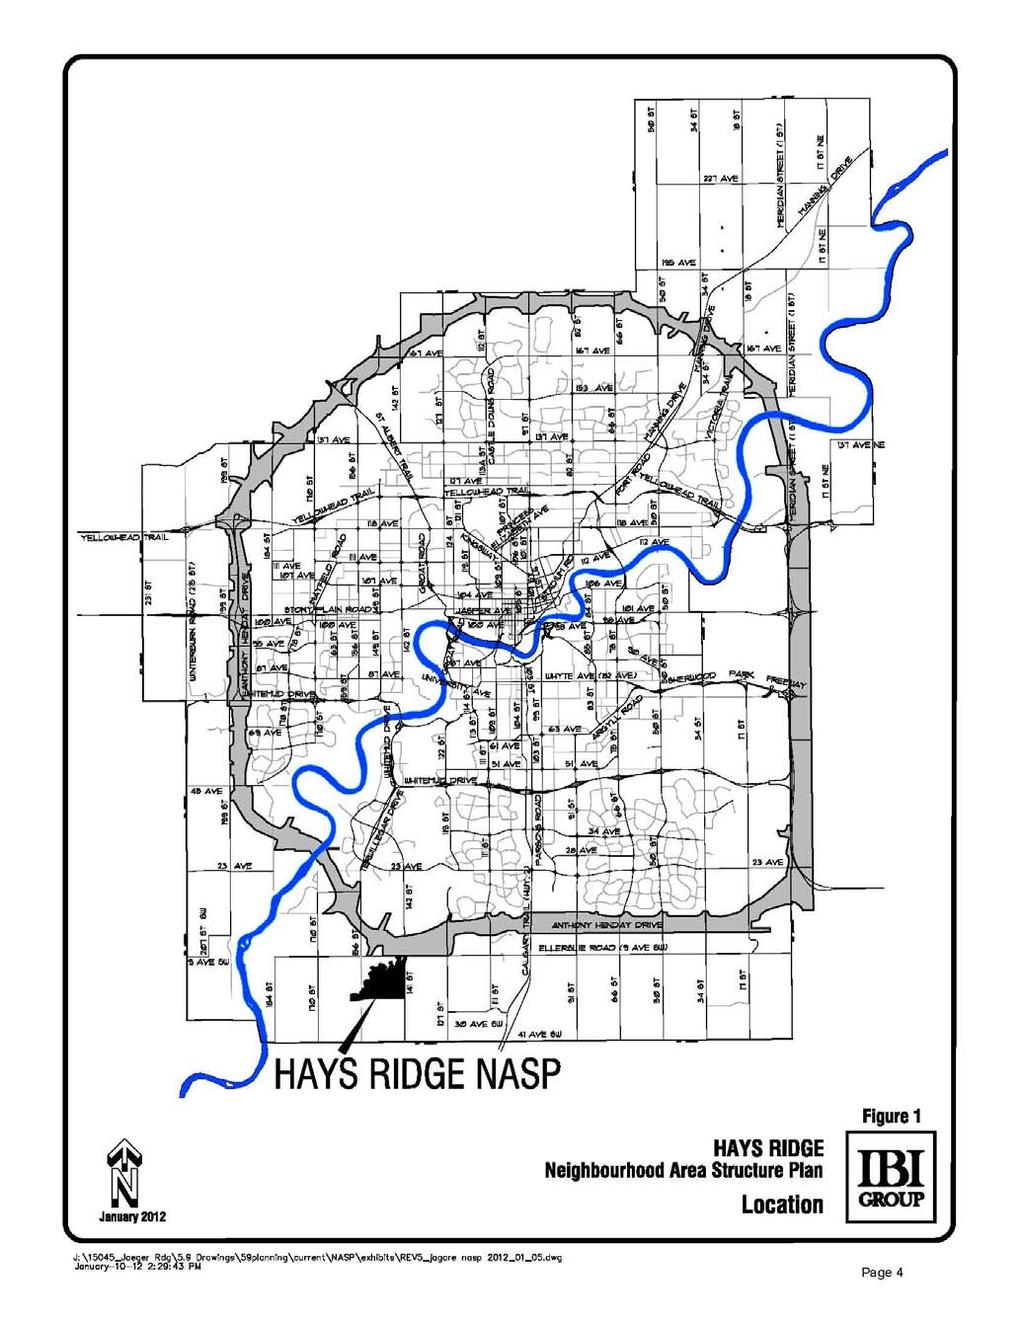 2.0 PLAN CONTEXT 2.1 Location The Hays Ridge NASP is located in southwest Edmonton, and is comprised of lands largely located within Section 23-51-25-4 and the NE ¼ 15-51-25-4.